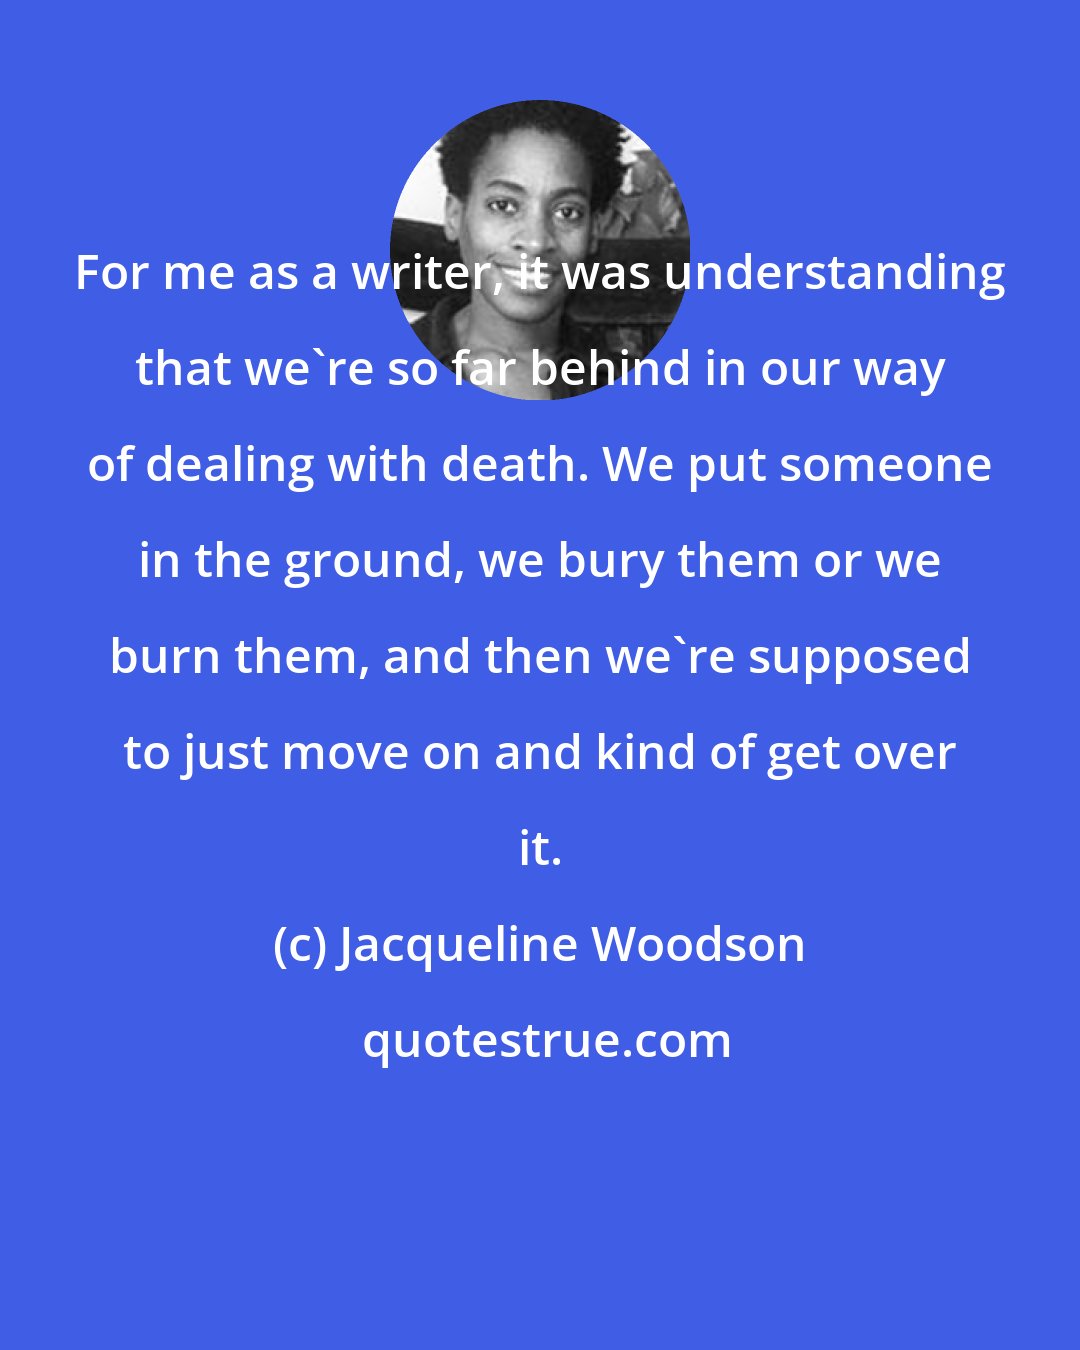 Jacqueline Woodson: For me as a writer, it was understanding that we're so far behind in our way of dealing with death. We put someone in the ground, we bury them or we burn them, and then we're supposed to just move on and kind of get over it.